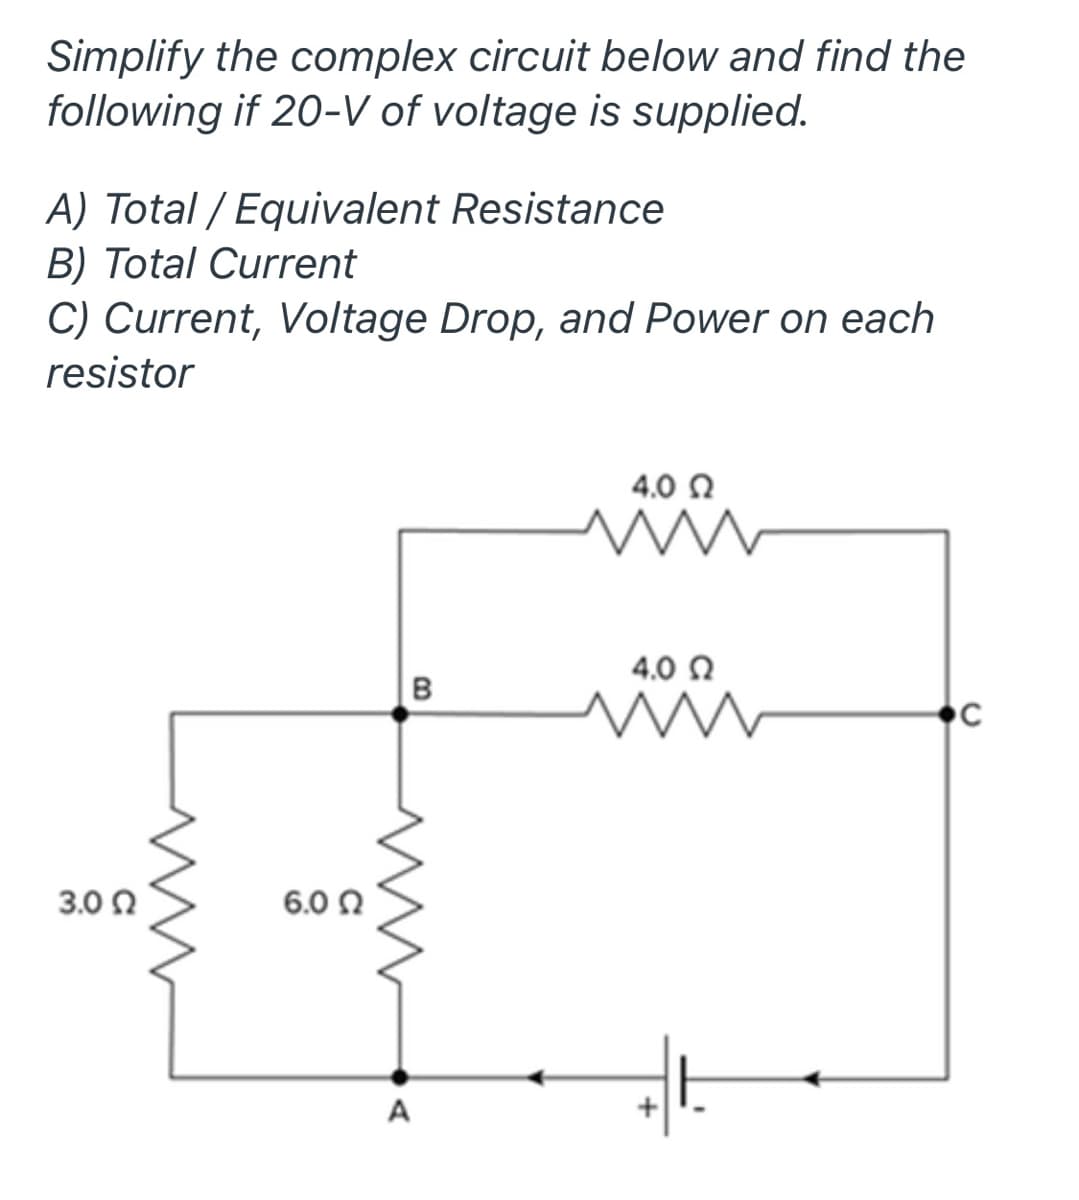 Simplify the complex circuit below and find the
following if 20-V of voltage is supplied.
A) Total / Equivalent Resistance
B) Total Current
C) Current, Voltage Drop, and Power on each
resistor
4.0 0
4,0 Q
B
3.0 0
6.0 Ω
A
